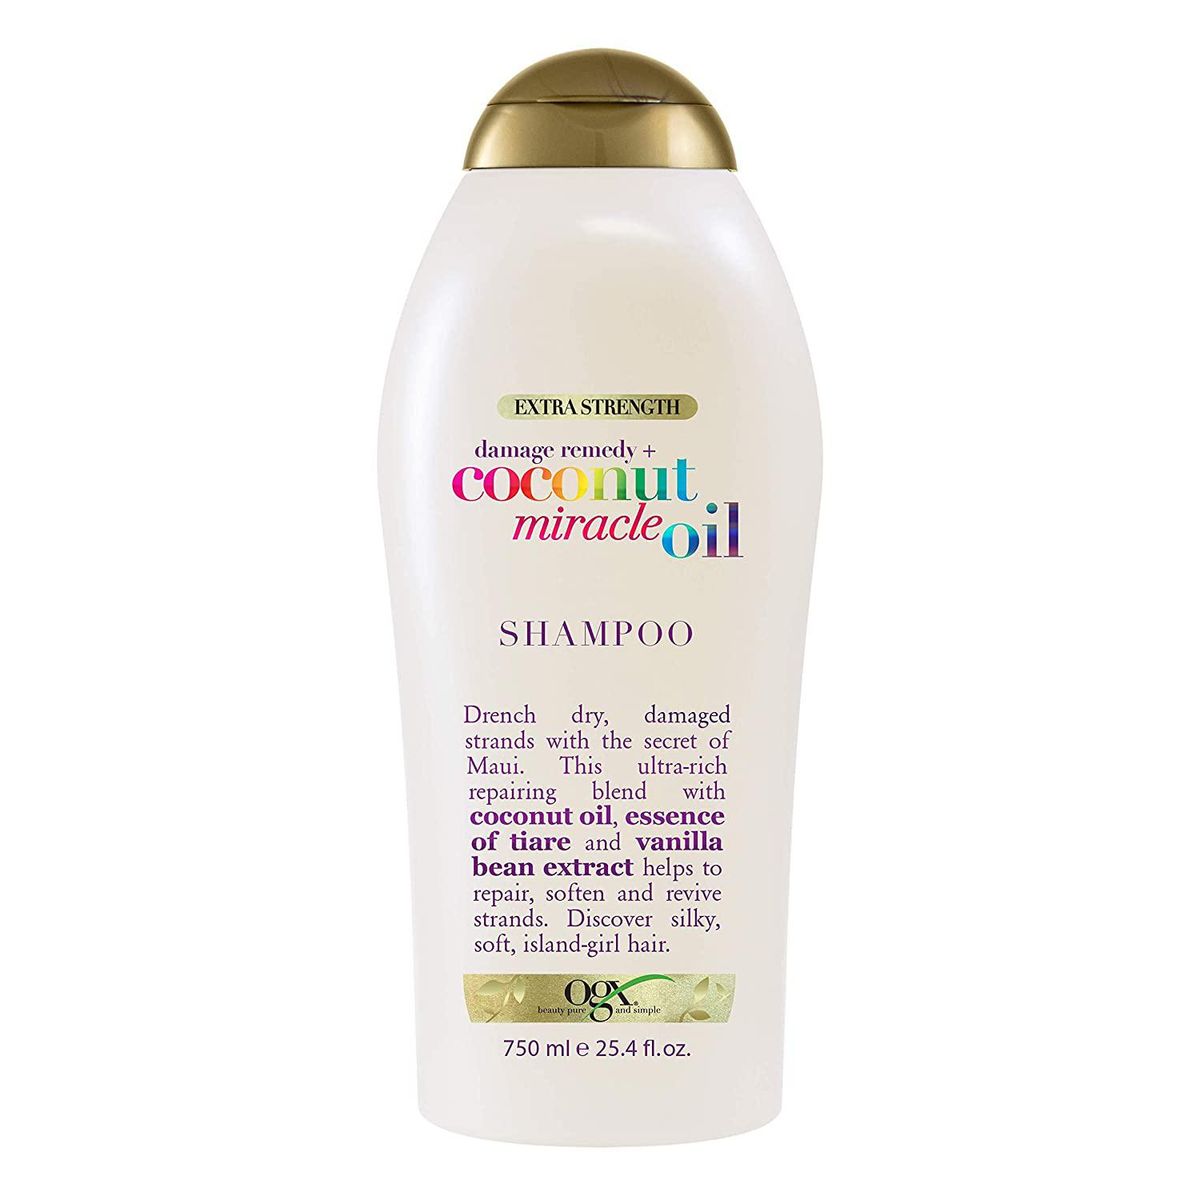 ogx extra strength damage remedy and coconut miracle oil shampoo